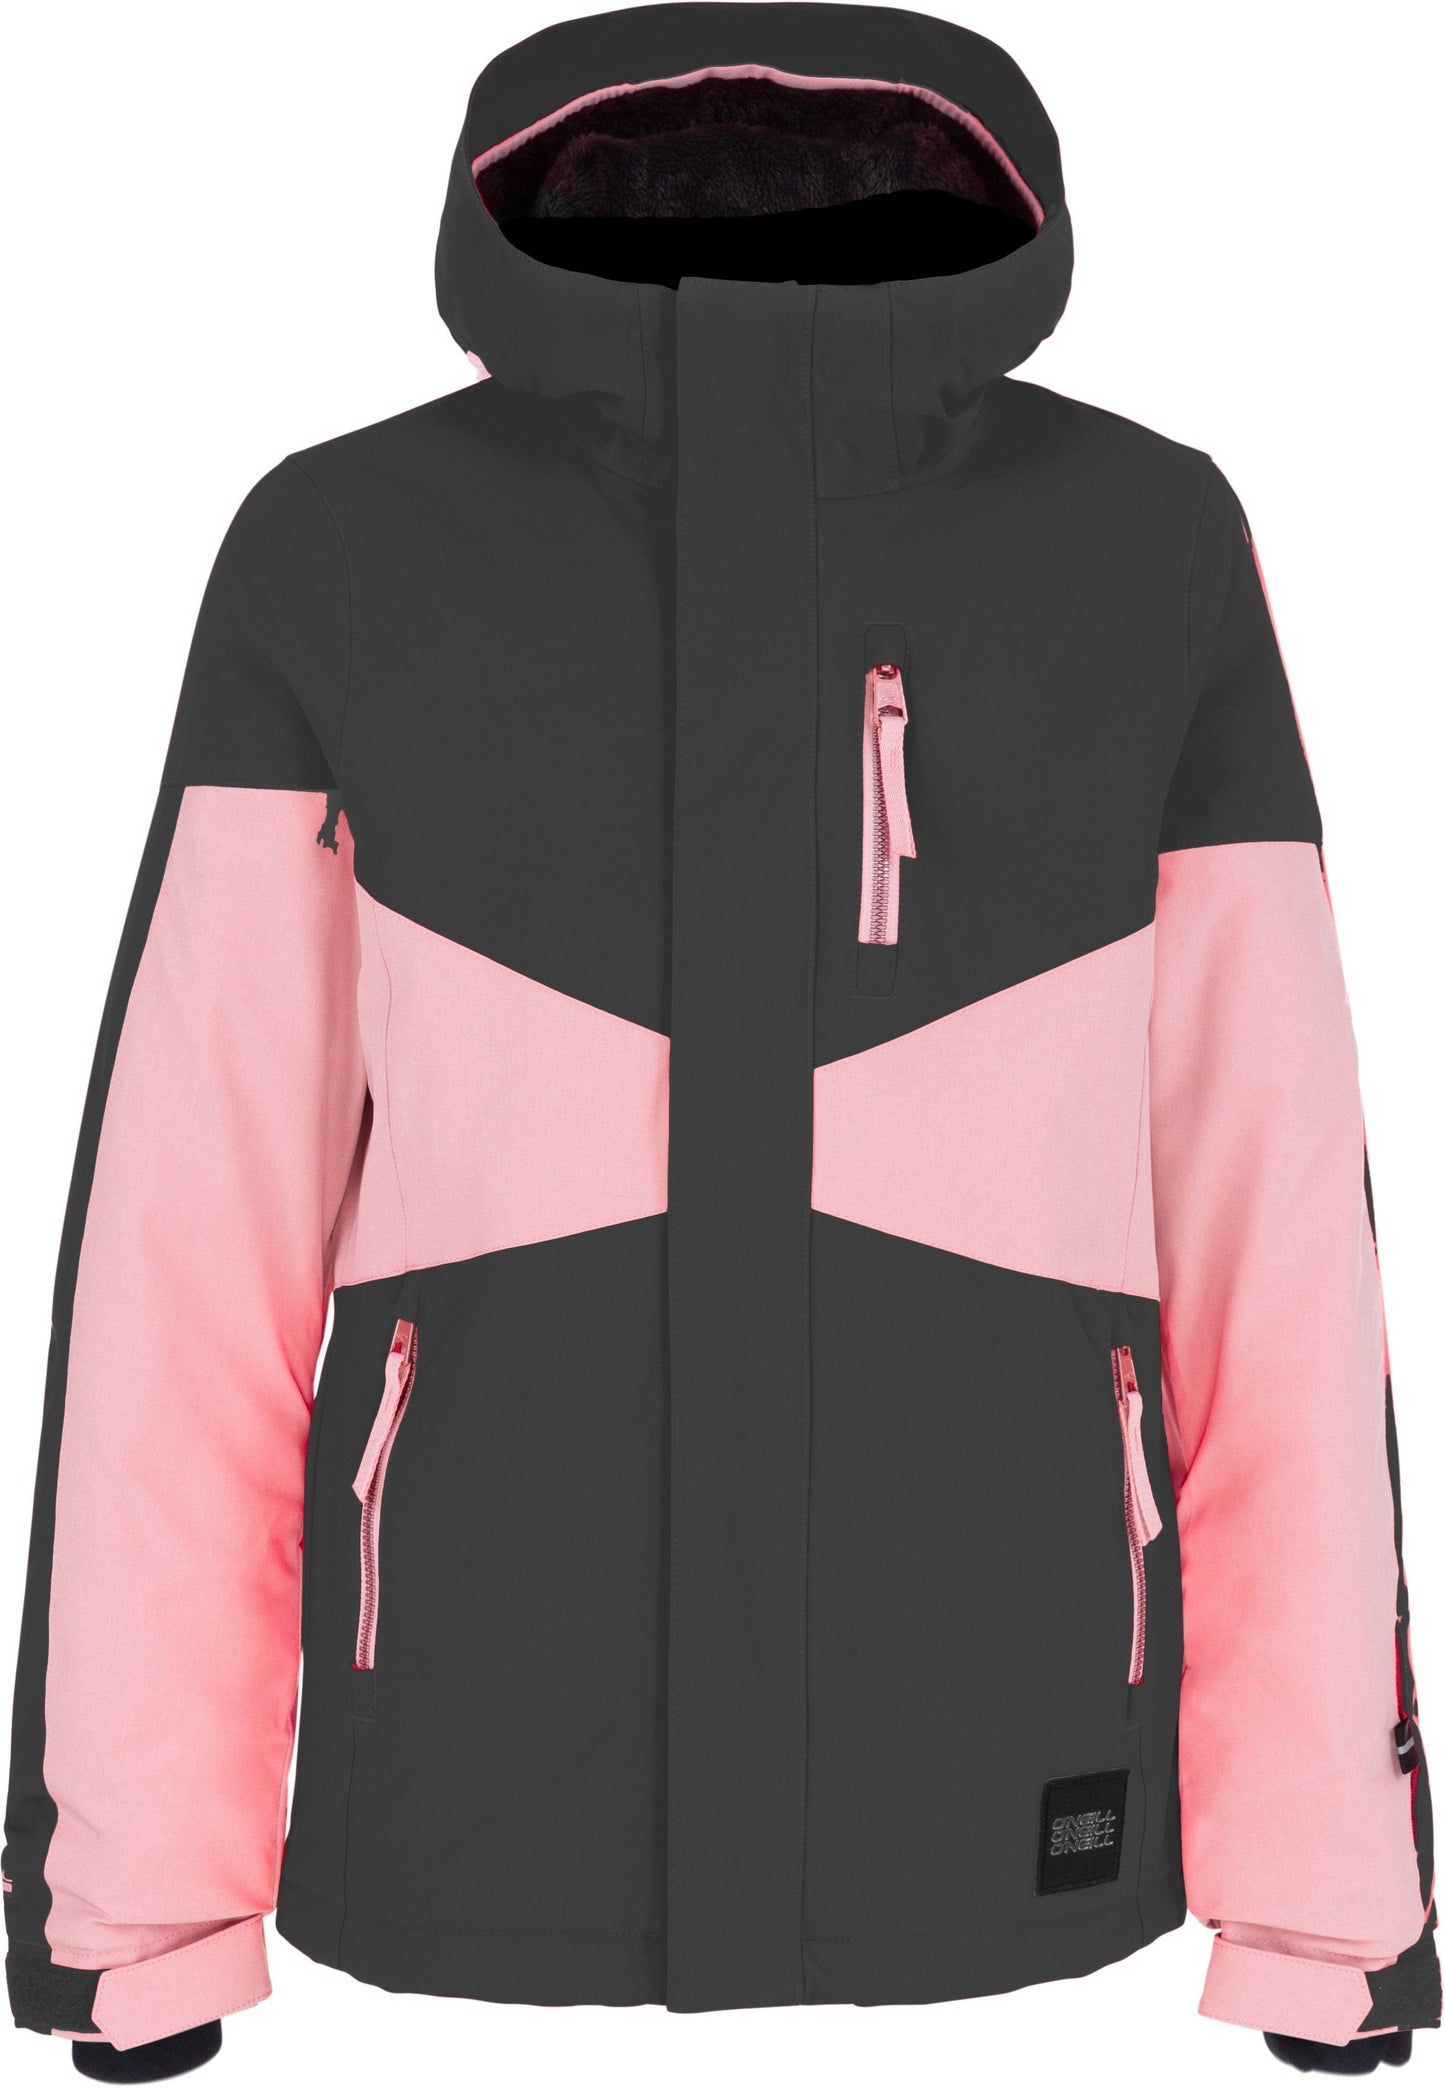 O'Neill Girl's Coral Ski and Snowboard Jacket Pink and Grey Front